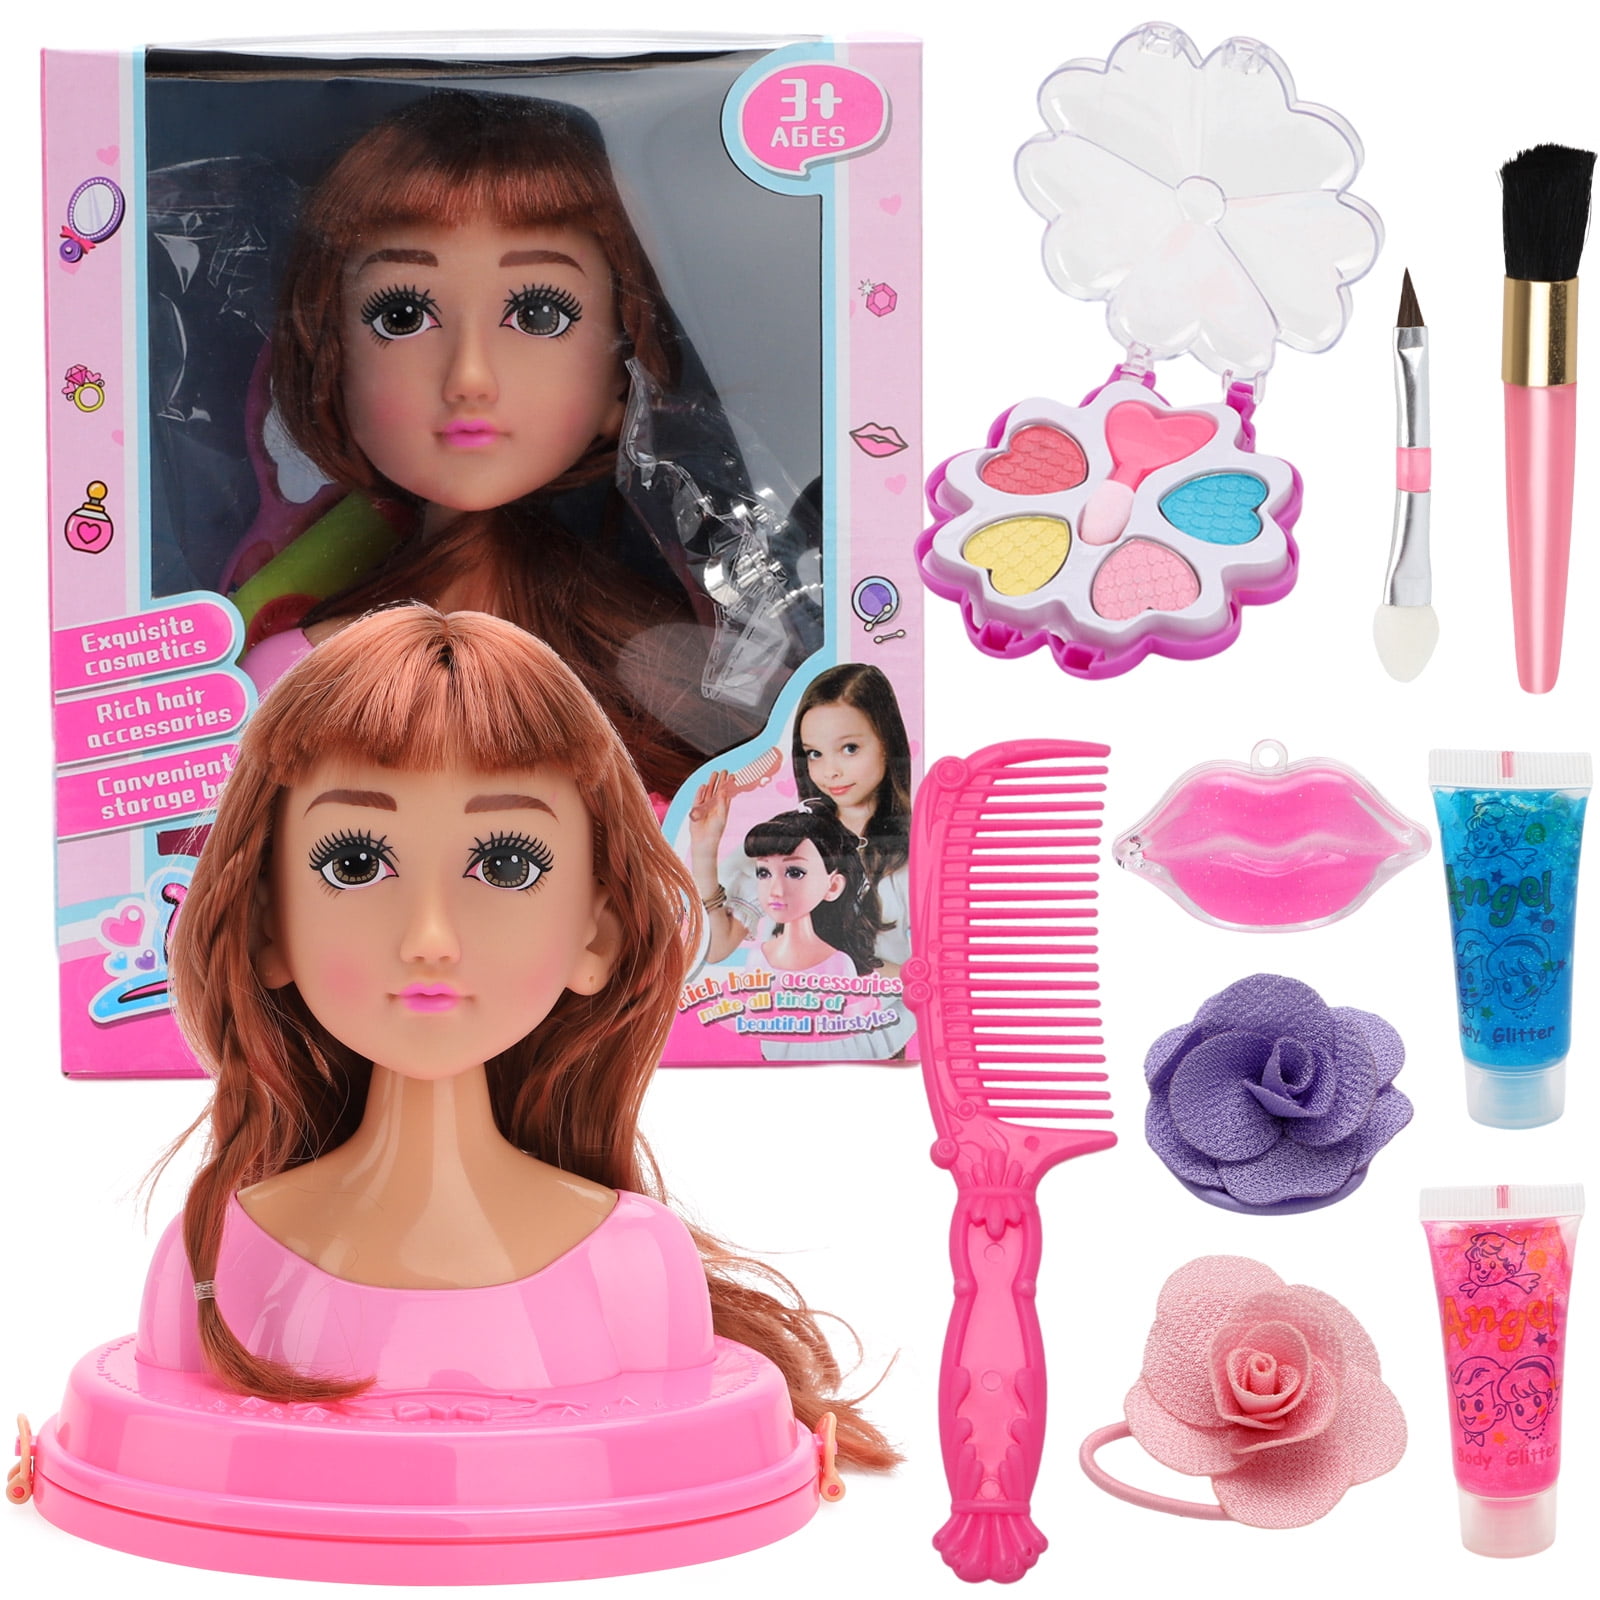 GIRLS TOY DOLL STYLING HEAD WITH ACCESSORIES COMB MIRROR MAKE UP BEAUTY VANITY 